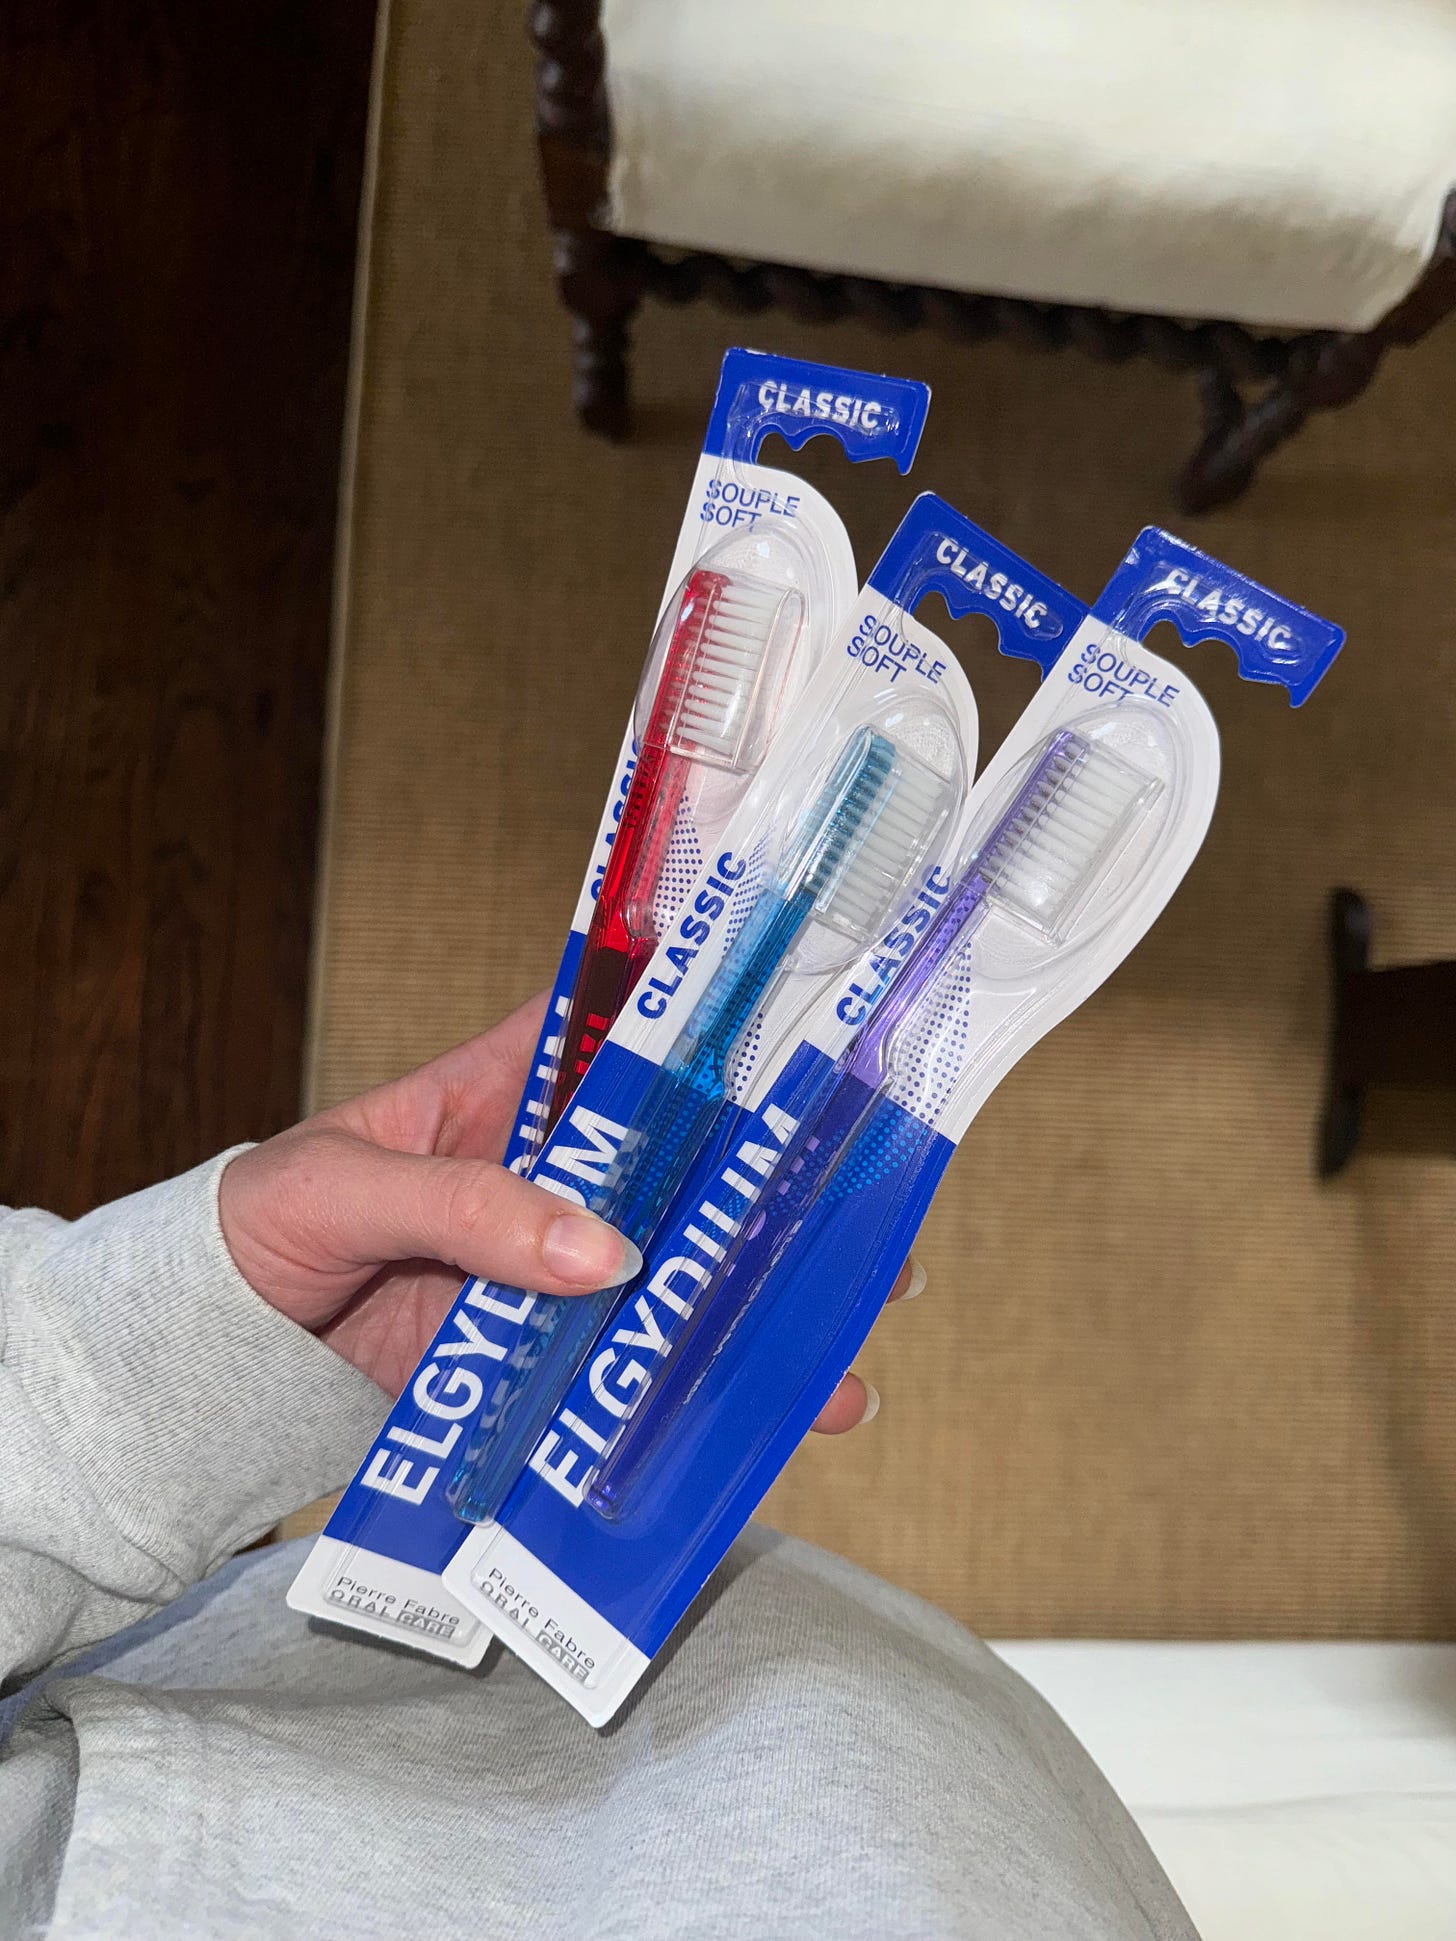 Three packaged toothbrushes